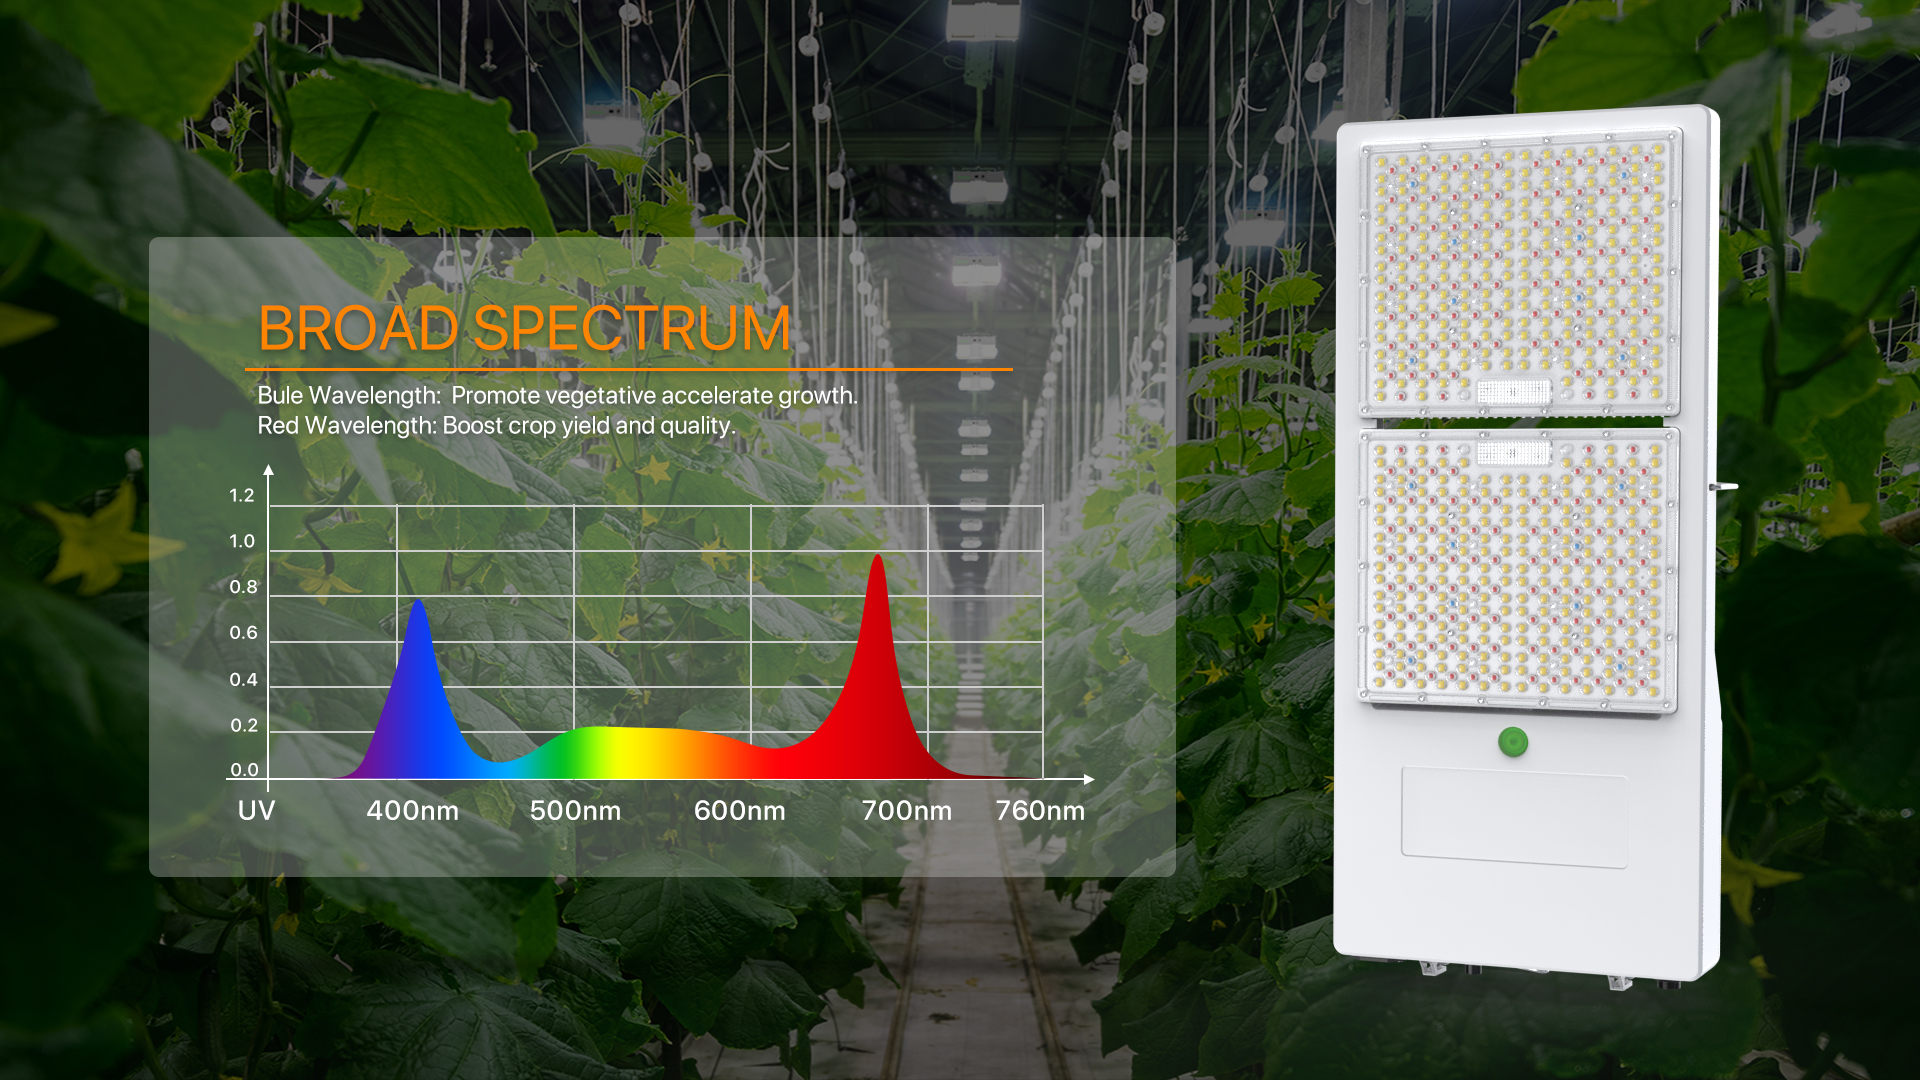 How to evaluate the spectrum of grow lights?